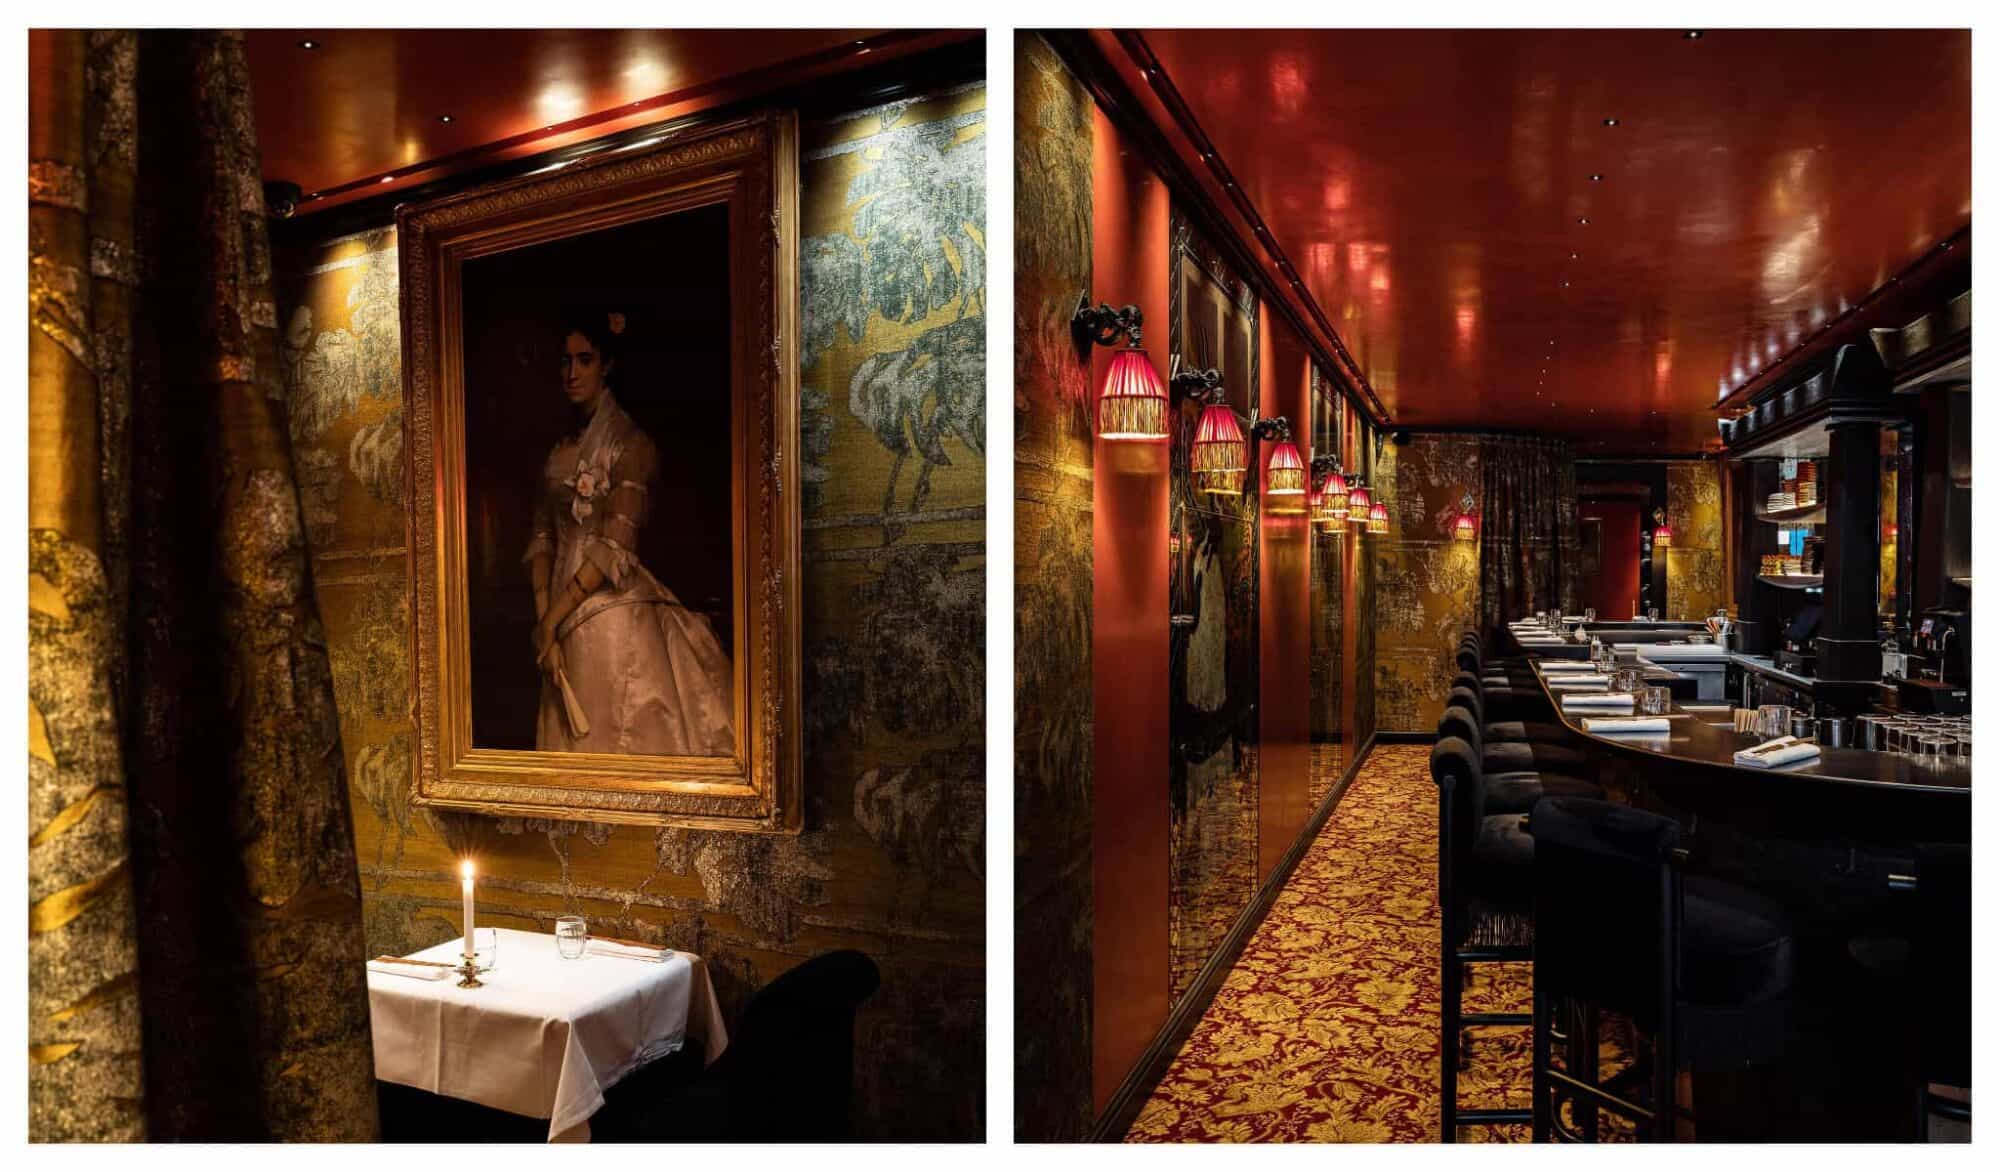 Left: A painting of a woman hangs inside Dragon Paris; Right: The sleek black wooden bar table in Dragon Paris with black bar stools.